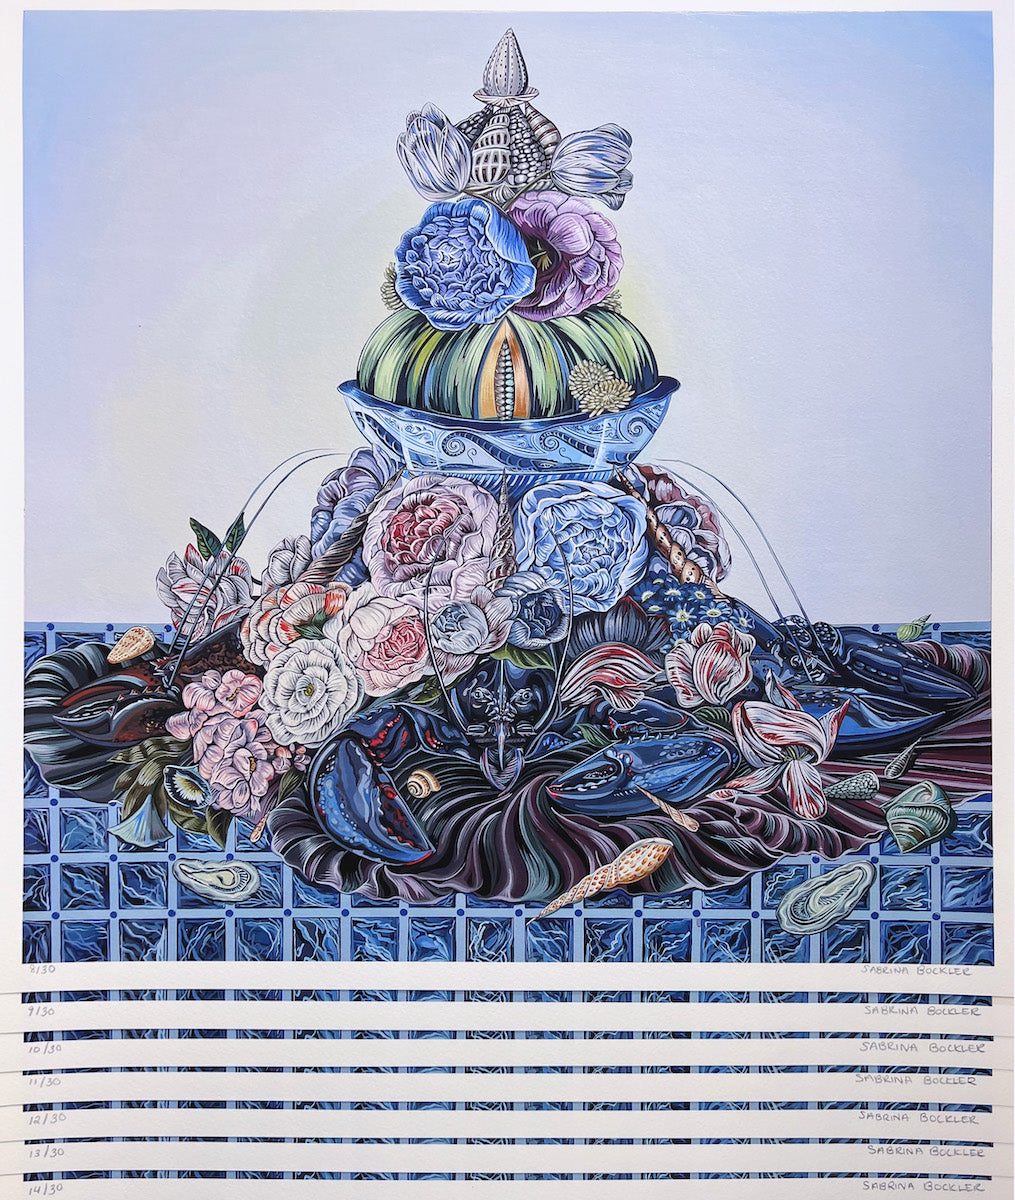 Stack of Sabrina Bockler print of feast on table piled up - lobsters, florals, melons, etc